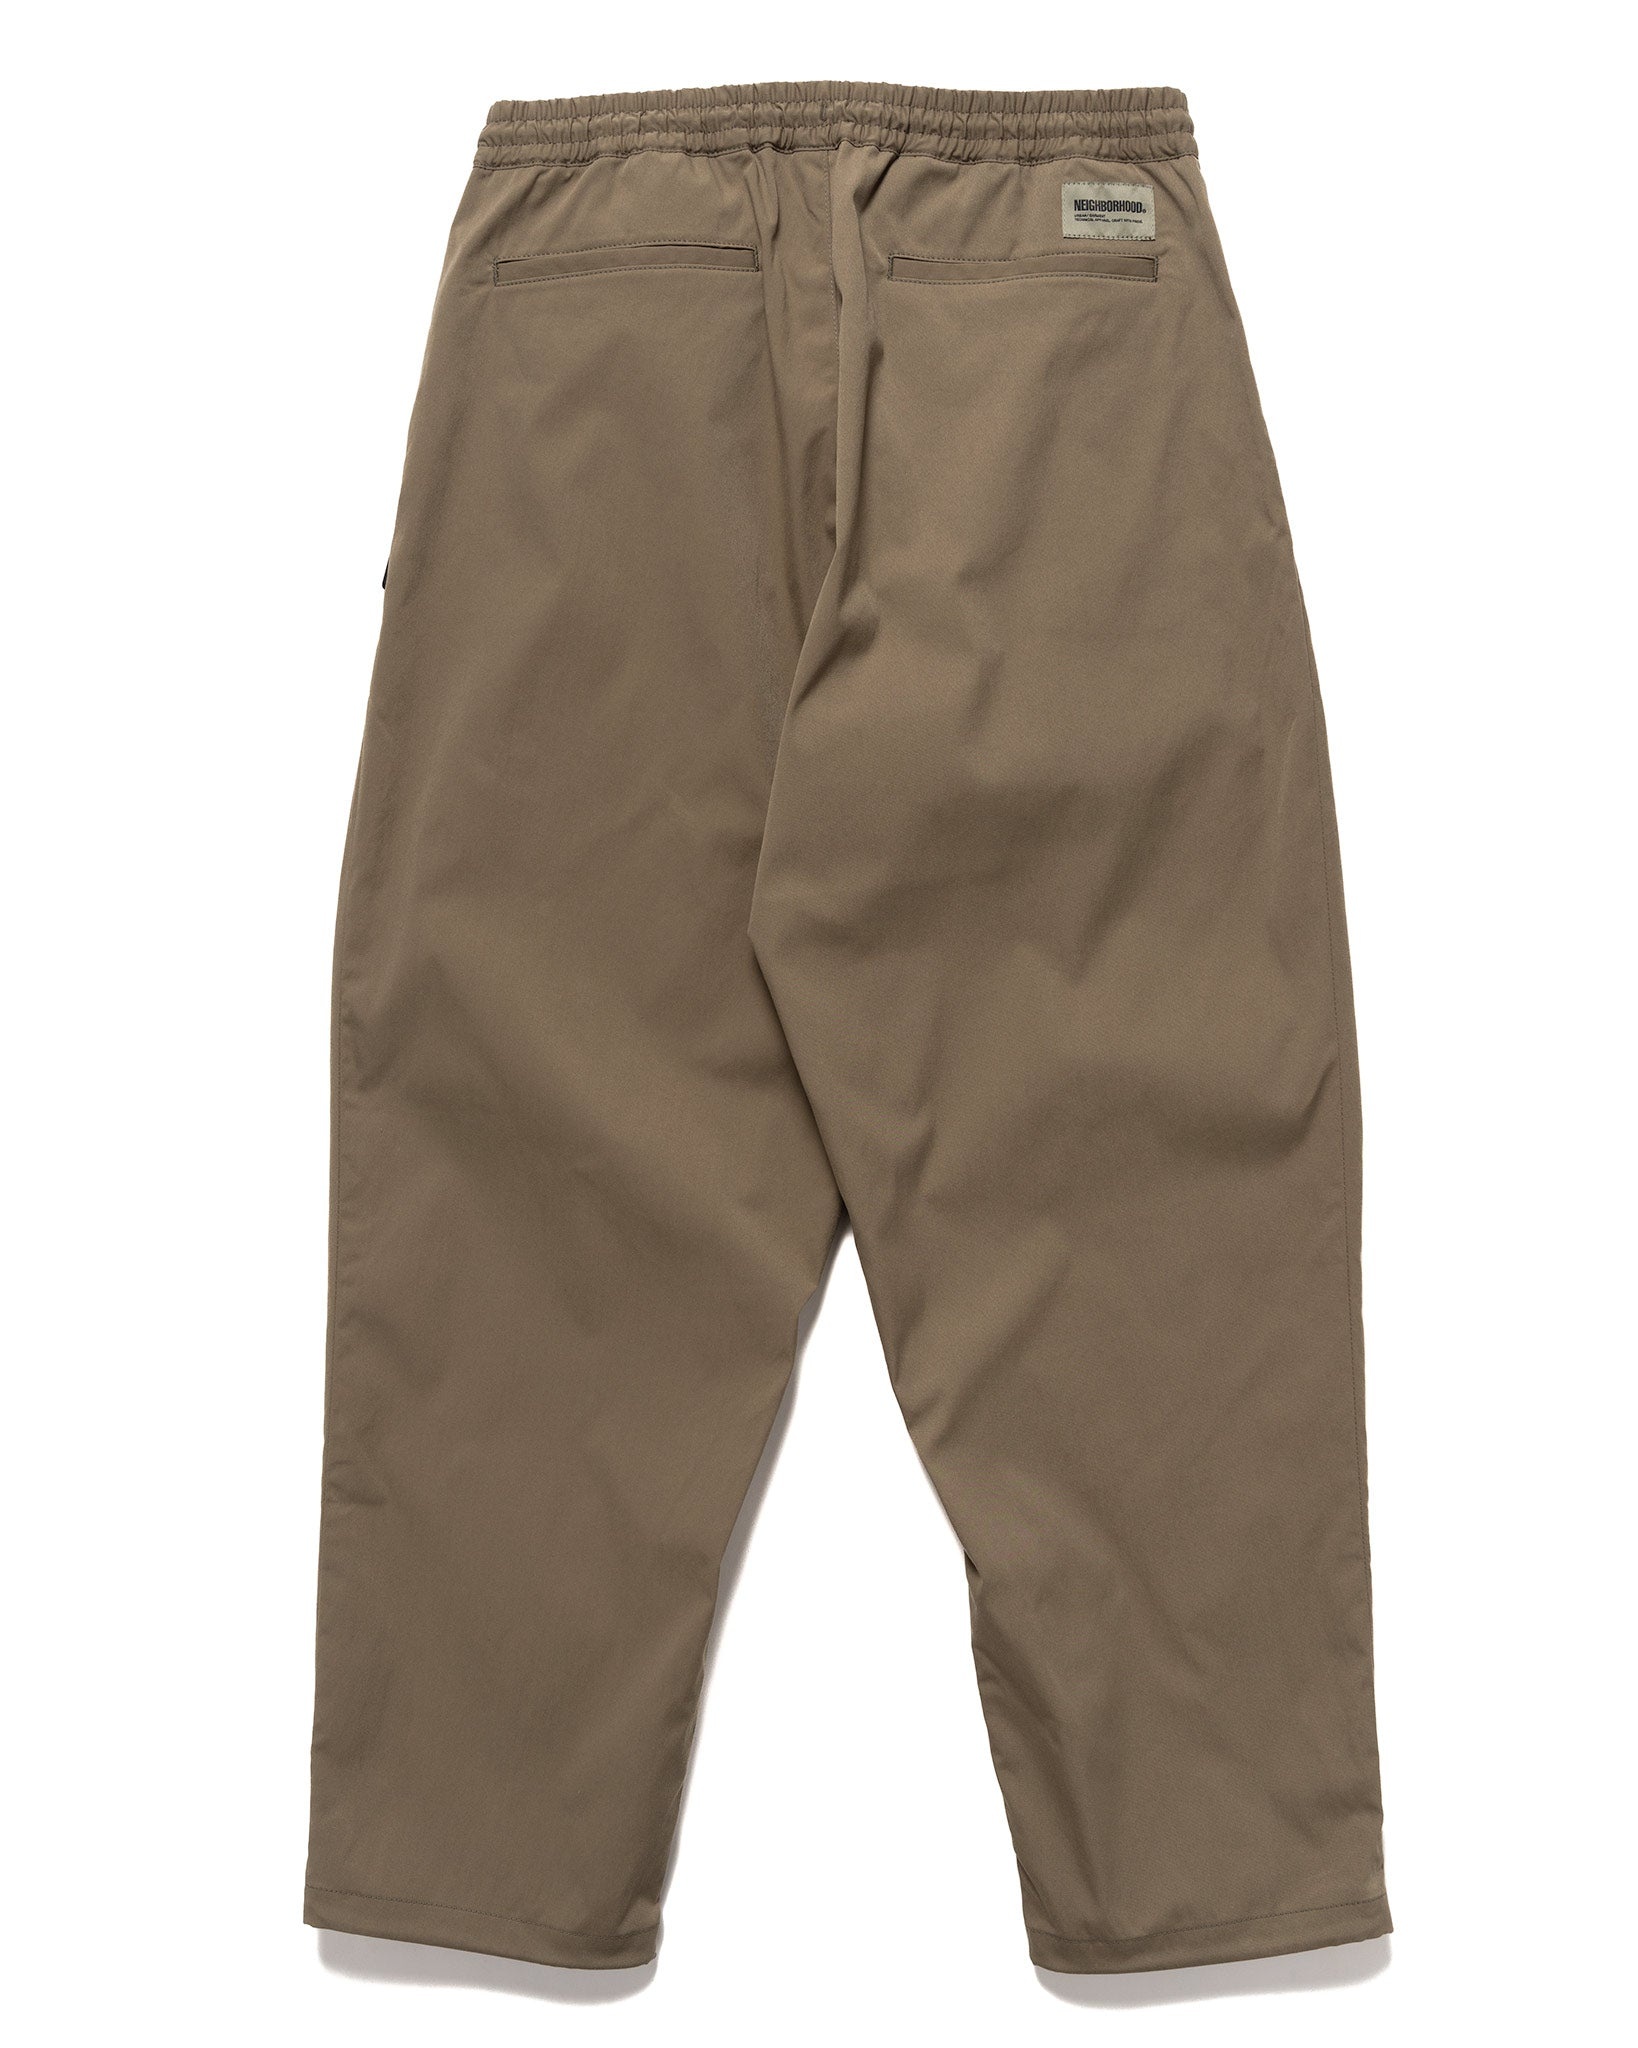 Baggysilhouette Easy Pants Olive Drab - 5